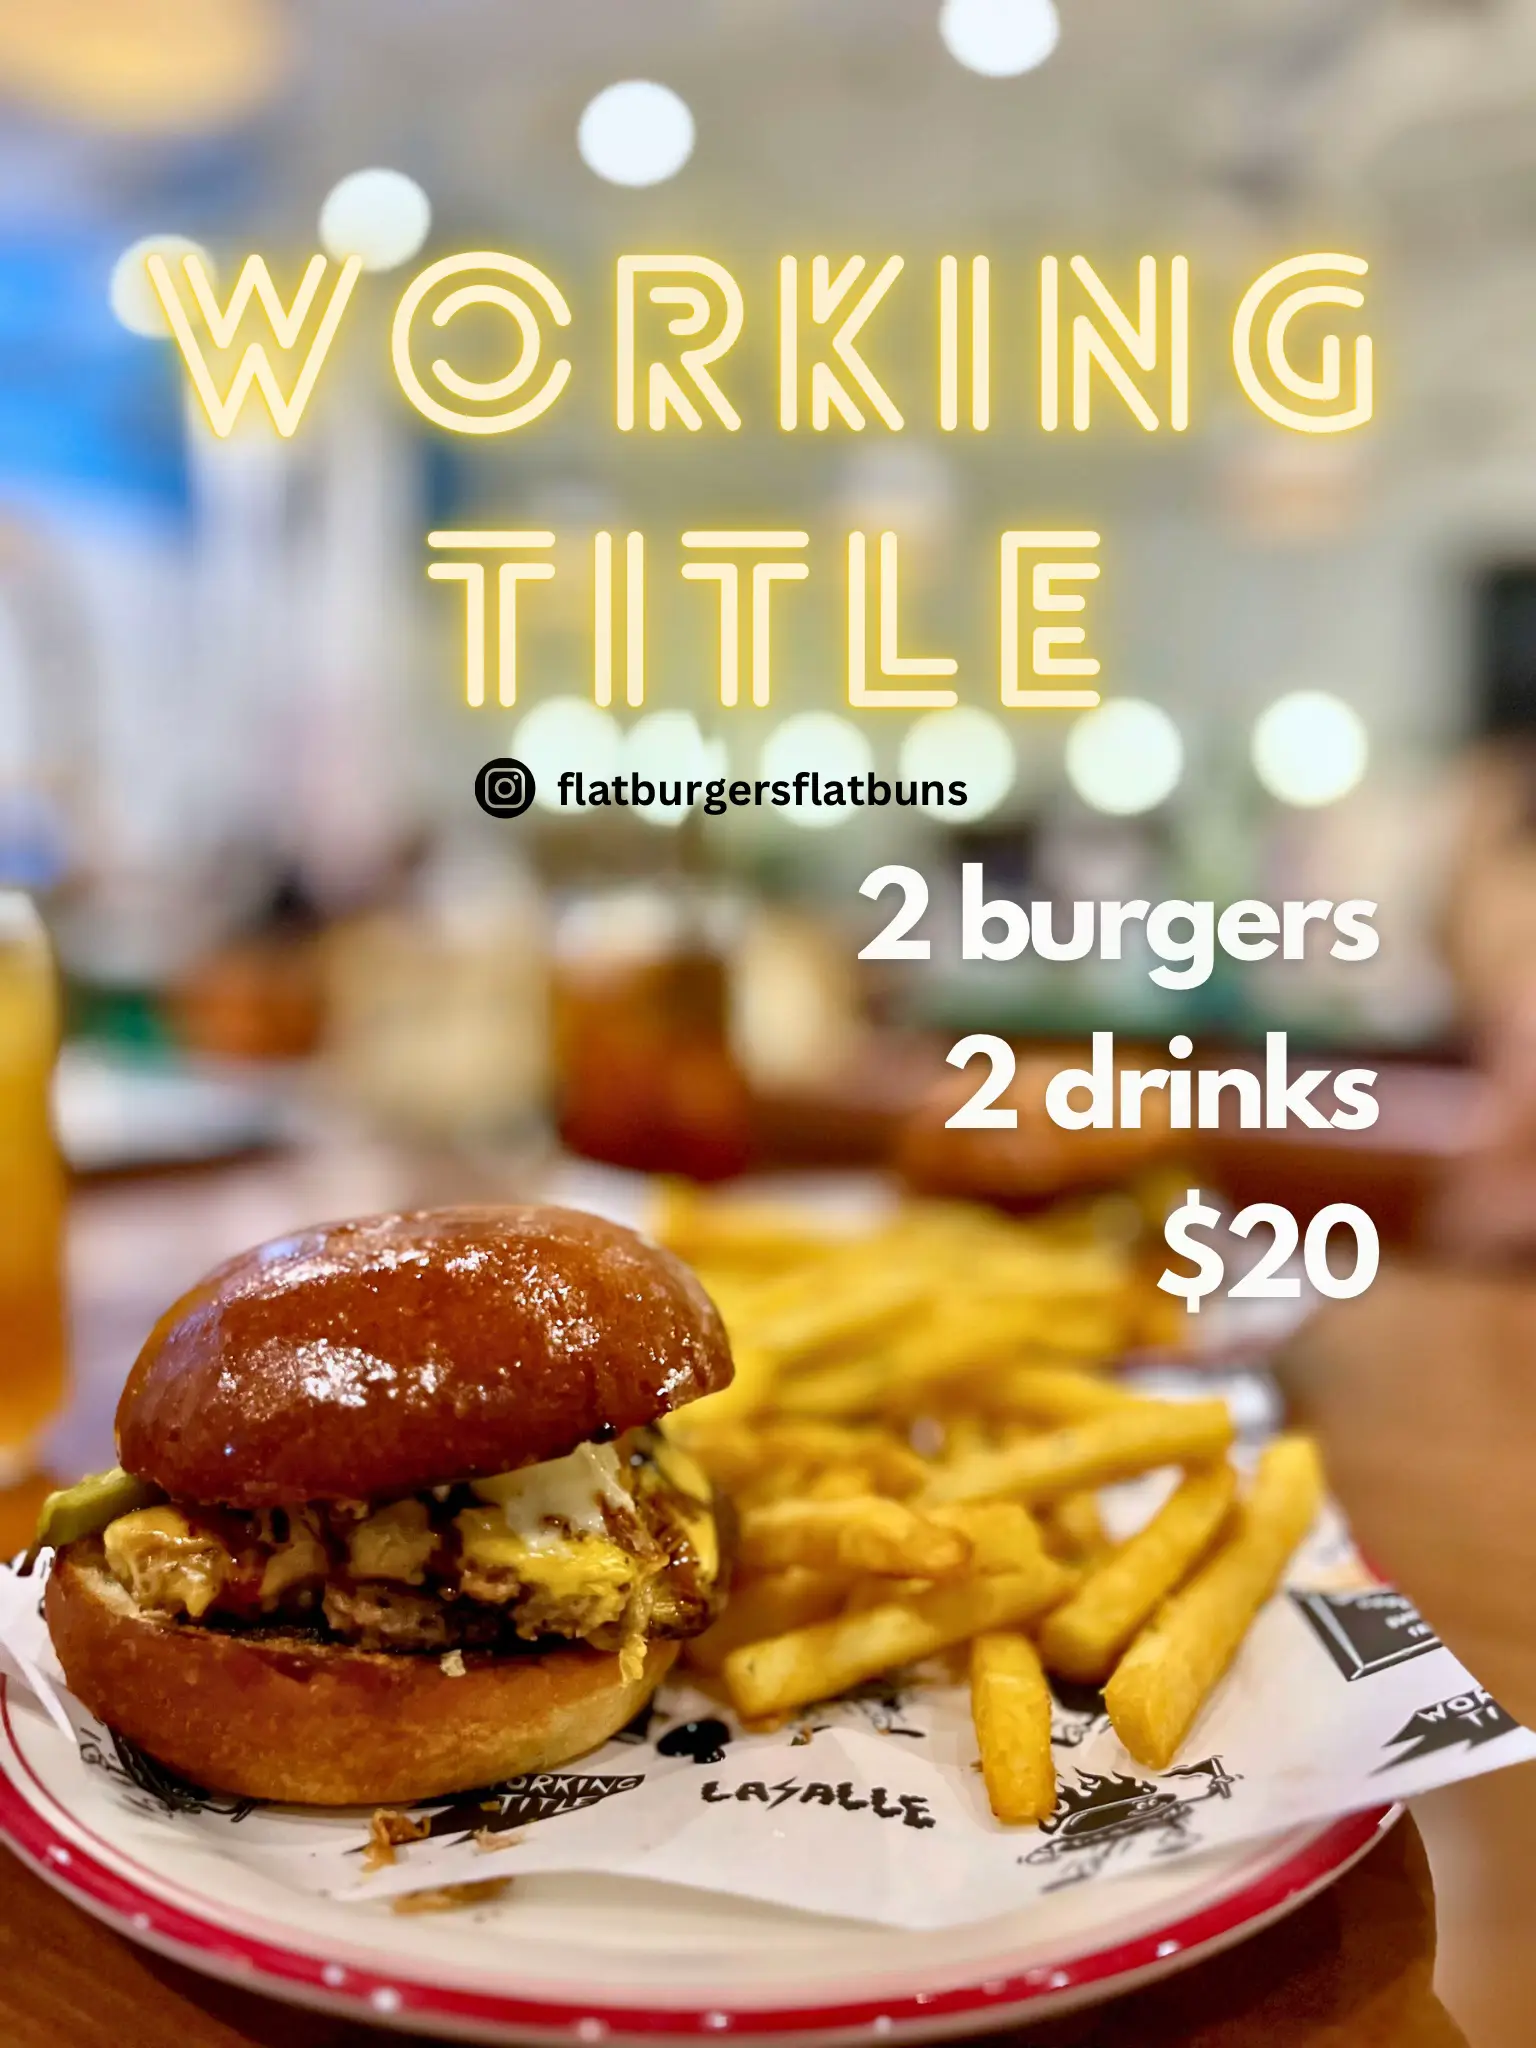 2 BURGERS 2 DRINKS @ $20 ONLY 🍔💸🤑's images